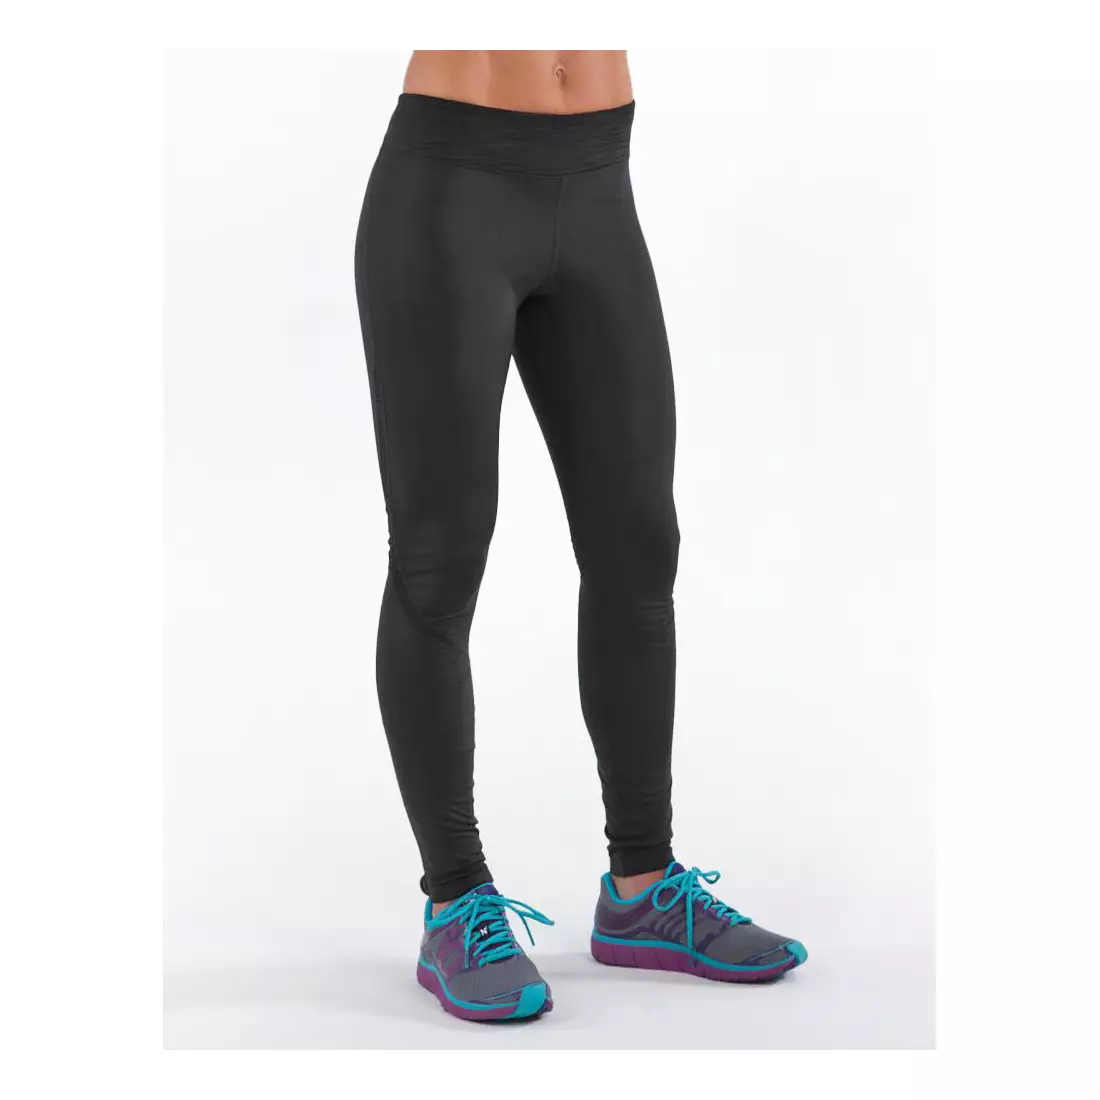 PEARL IZUMI W's Fly Thermal Tight 12211408-021 - women's insulated running pants